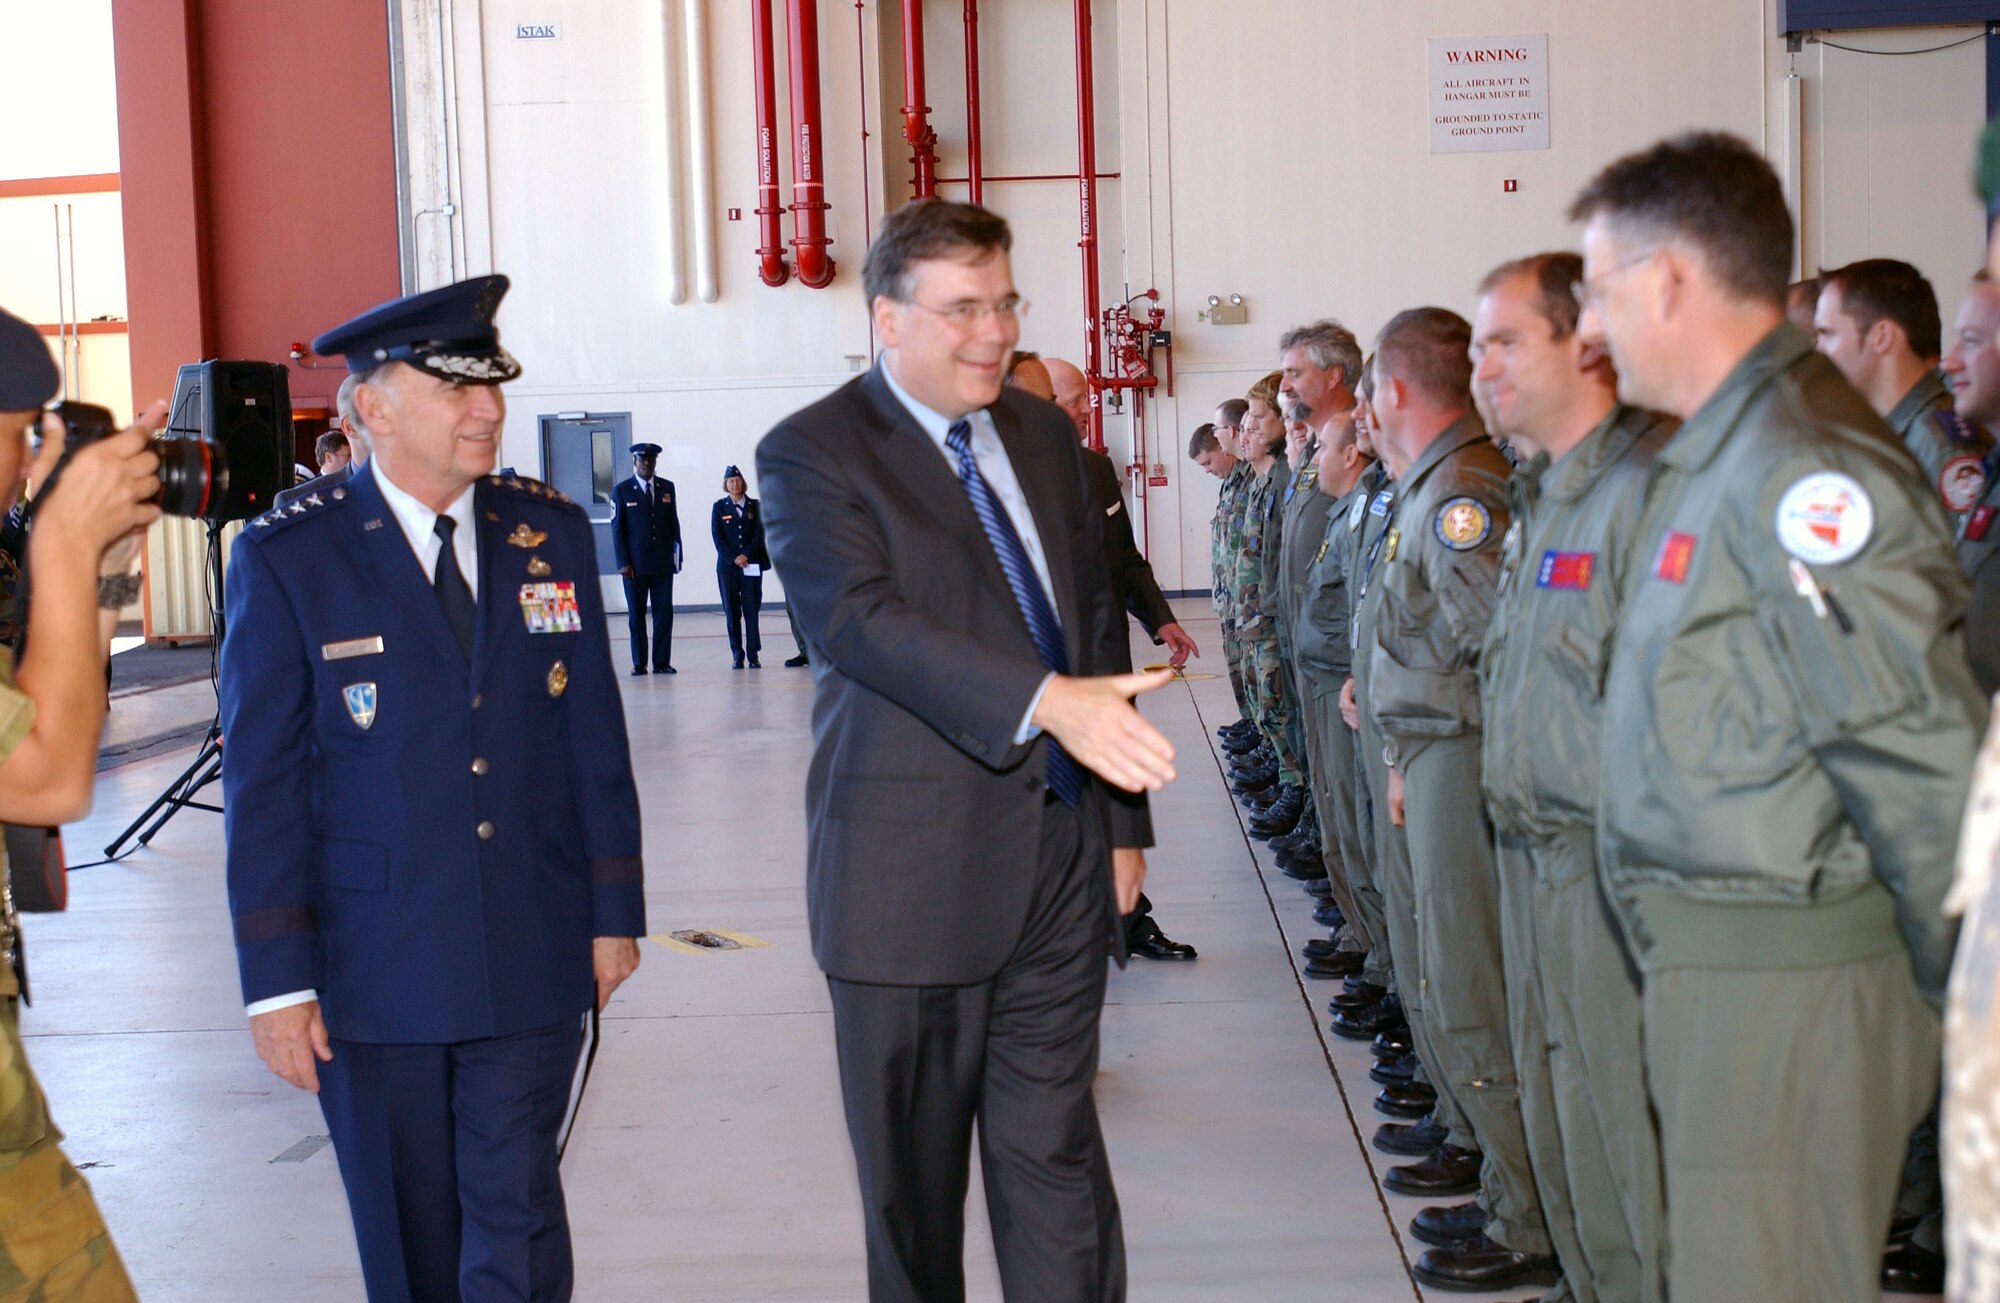 Gen. William T. Hobbins and Iceland Prime Minister Geir H. Haarde greet Airmen and NATO forces Aug. 13 during the opening ceremonies of exercise Northern Viking 2007. The exercise is designed to demonstrate U.S. commitment to the 1951 bilateral U.S.-Iceland defense agreement and reinvigorate air defense command and control capabilities of joint and coalition forces in Iceland. General Hobbins is commander of U.S. Air Forces in Europe. (U.S. Air Force photo) 